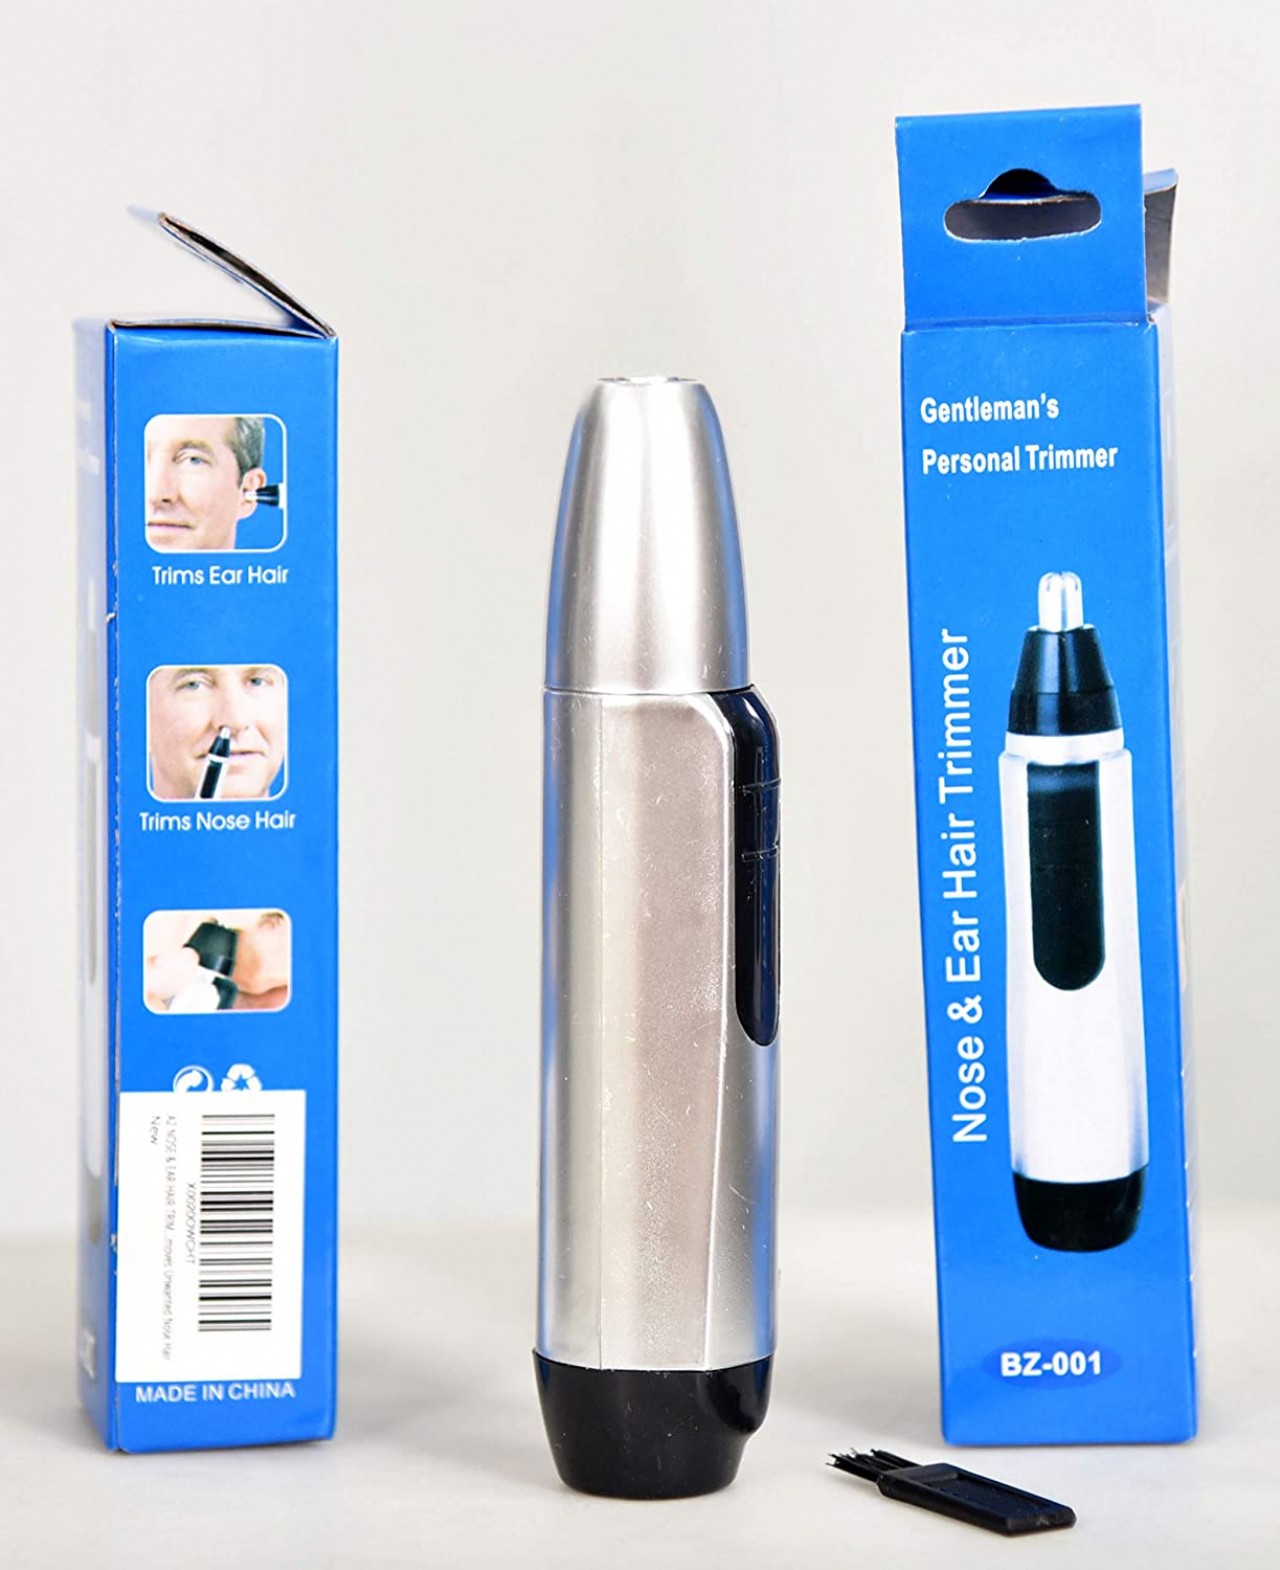 A-2 NOSE & EAR HAIR TRIMMER Clipper for Men & Women, Water Resistant, Stainless Steel Blades Remove